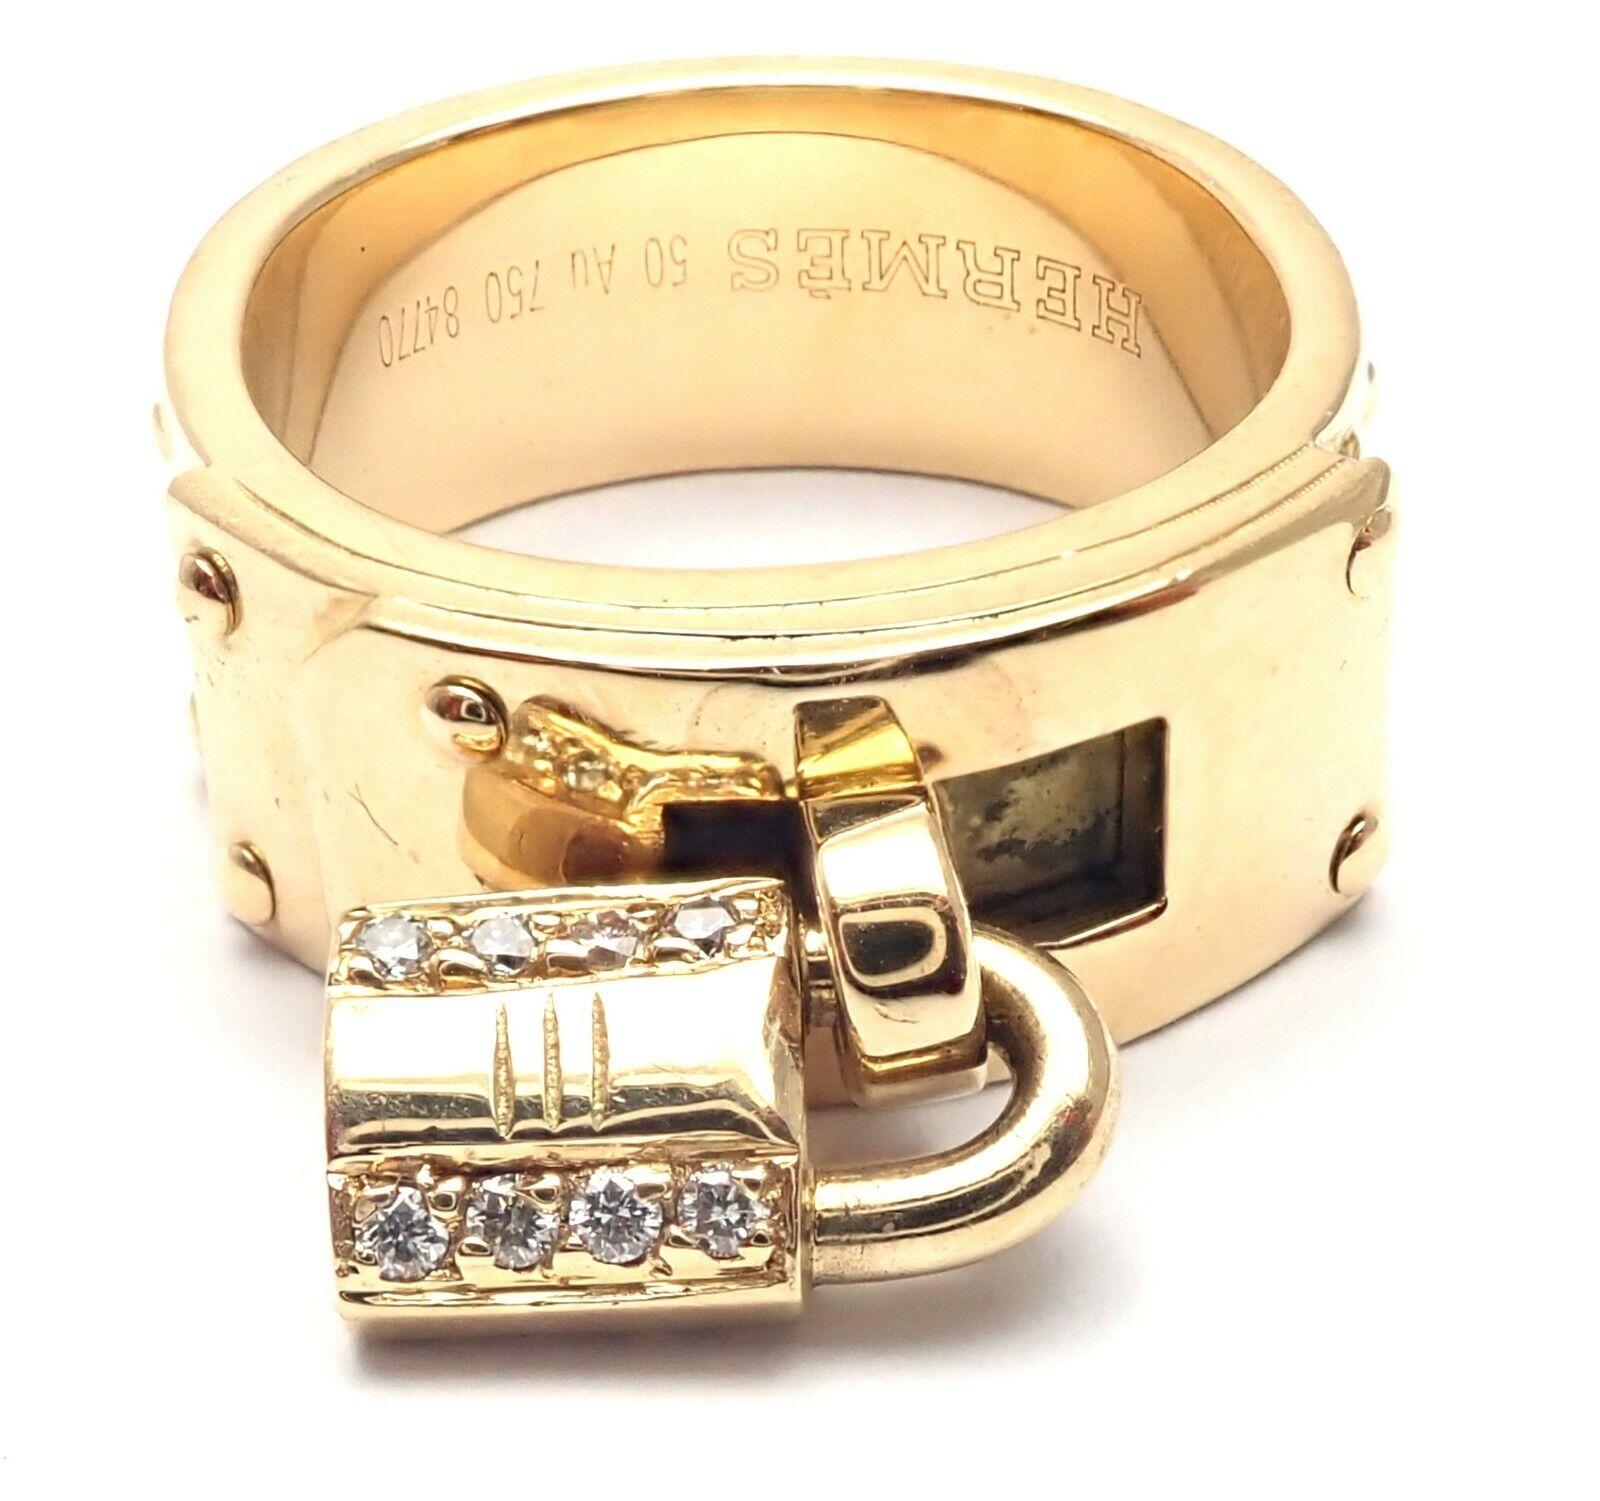 Hermes Jewelry & Watches:Fine Jewelry:Rings Rare! Authentic Hermes 18k Yellow Gold Diamond "H" Lock Band Ring Size 50